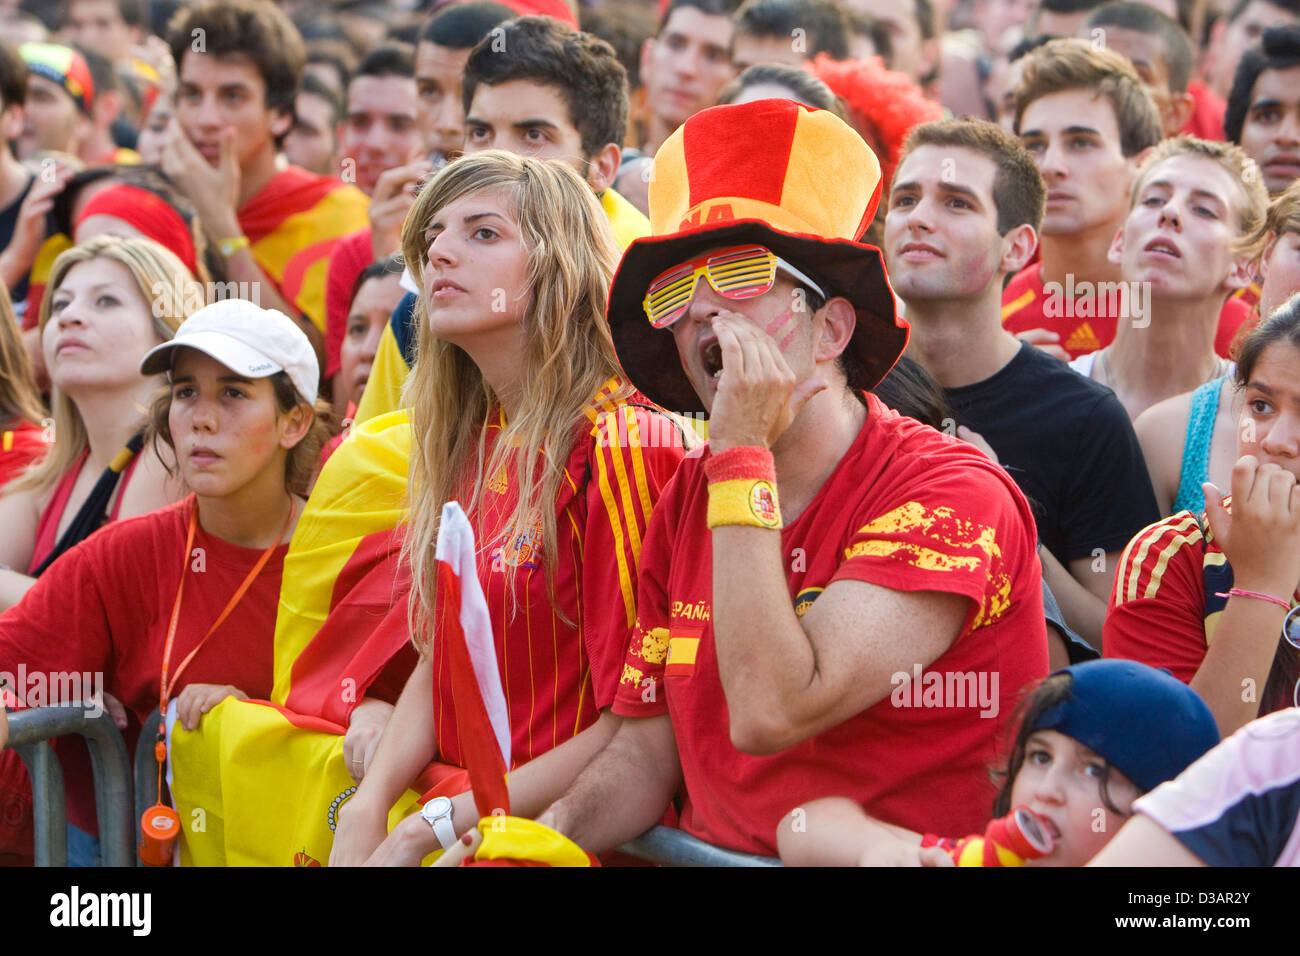 barcelona-spain-football-fans-watching-the-final-match-of-the-world-D3AR2Y.jpg